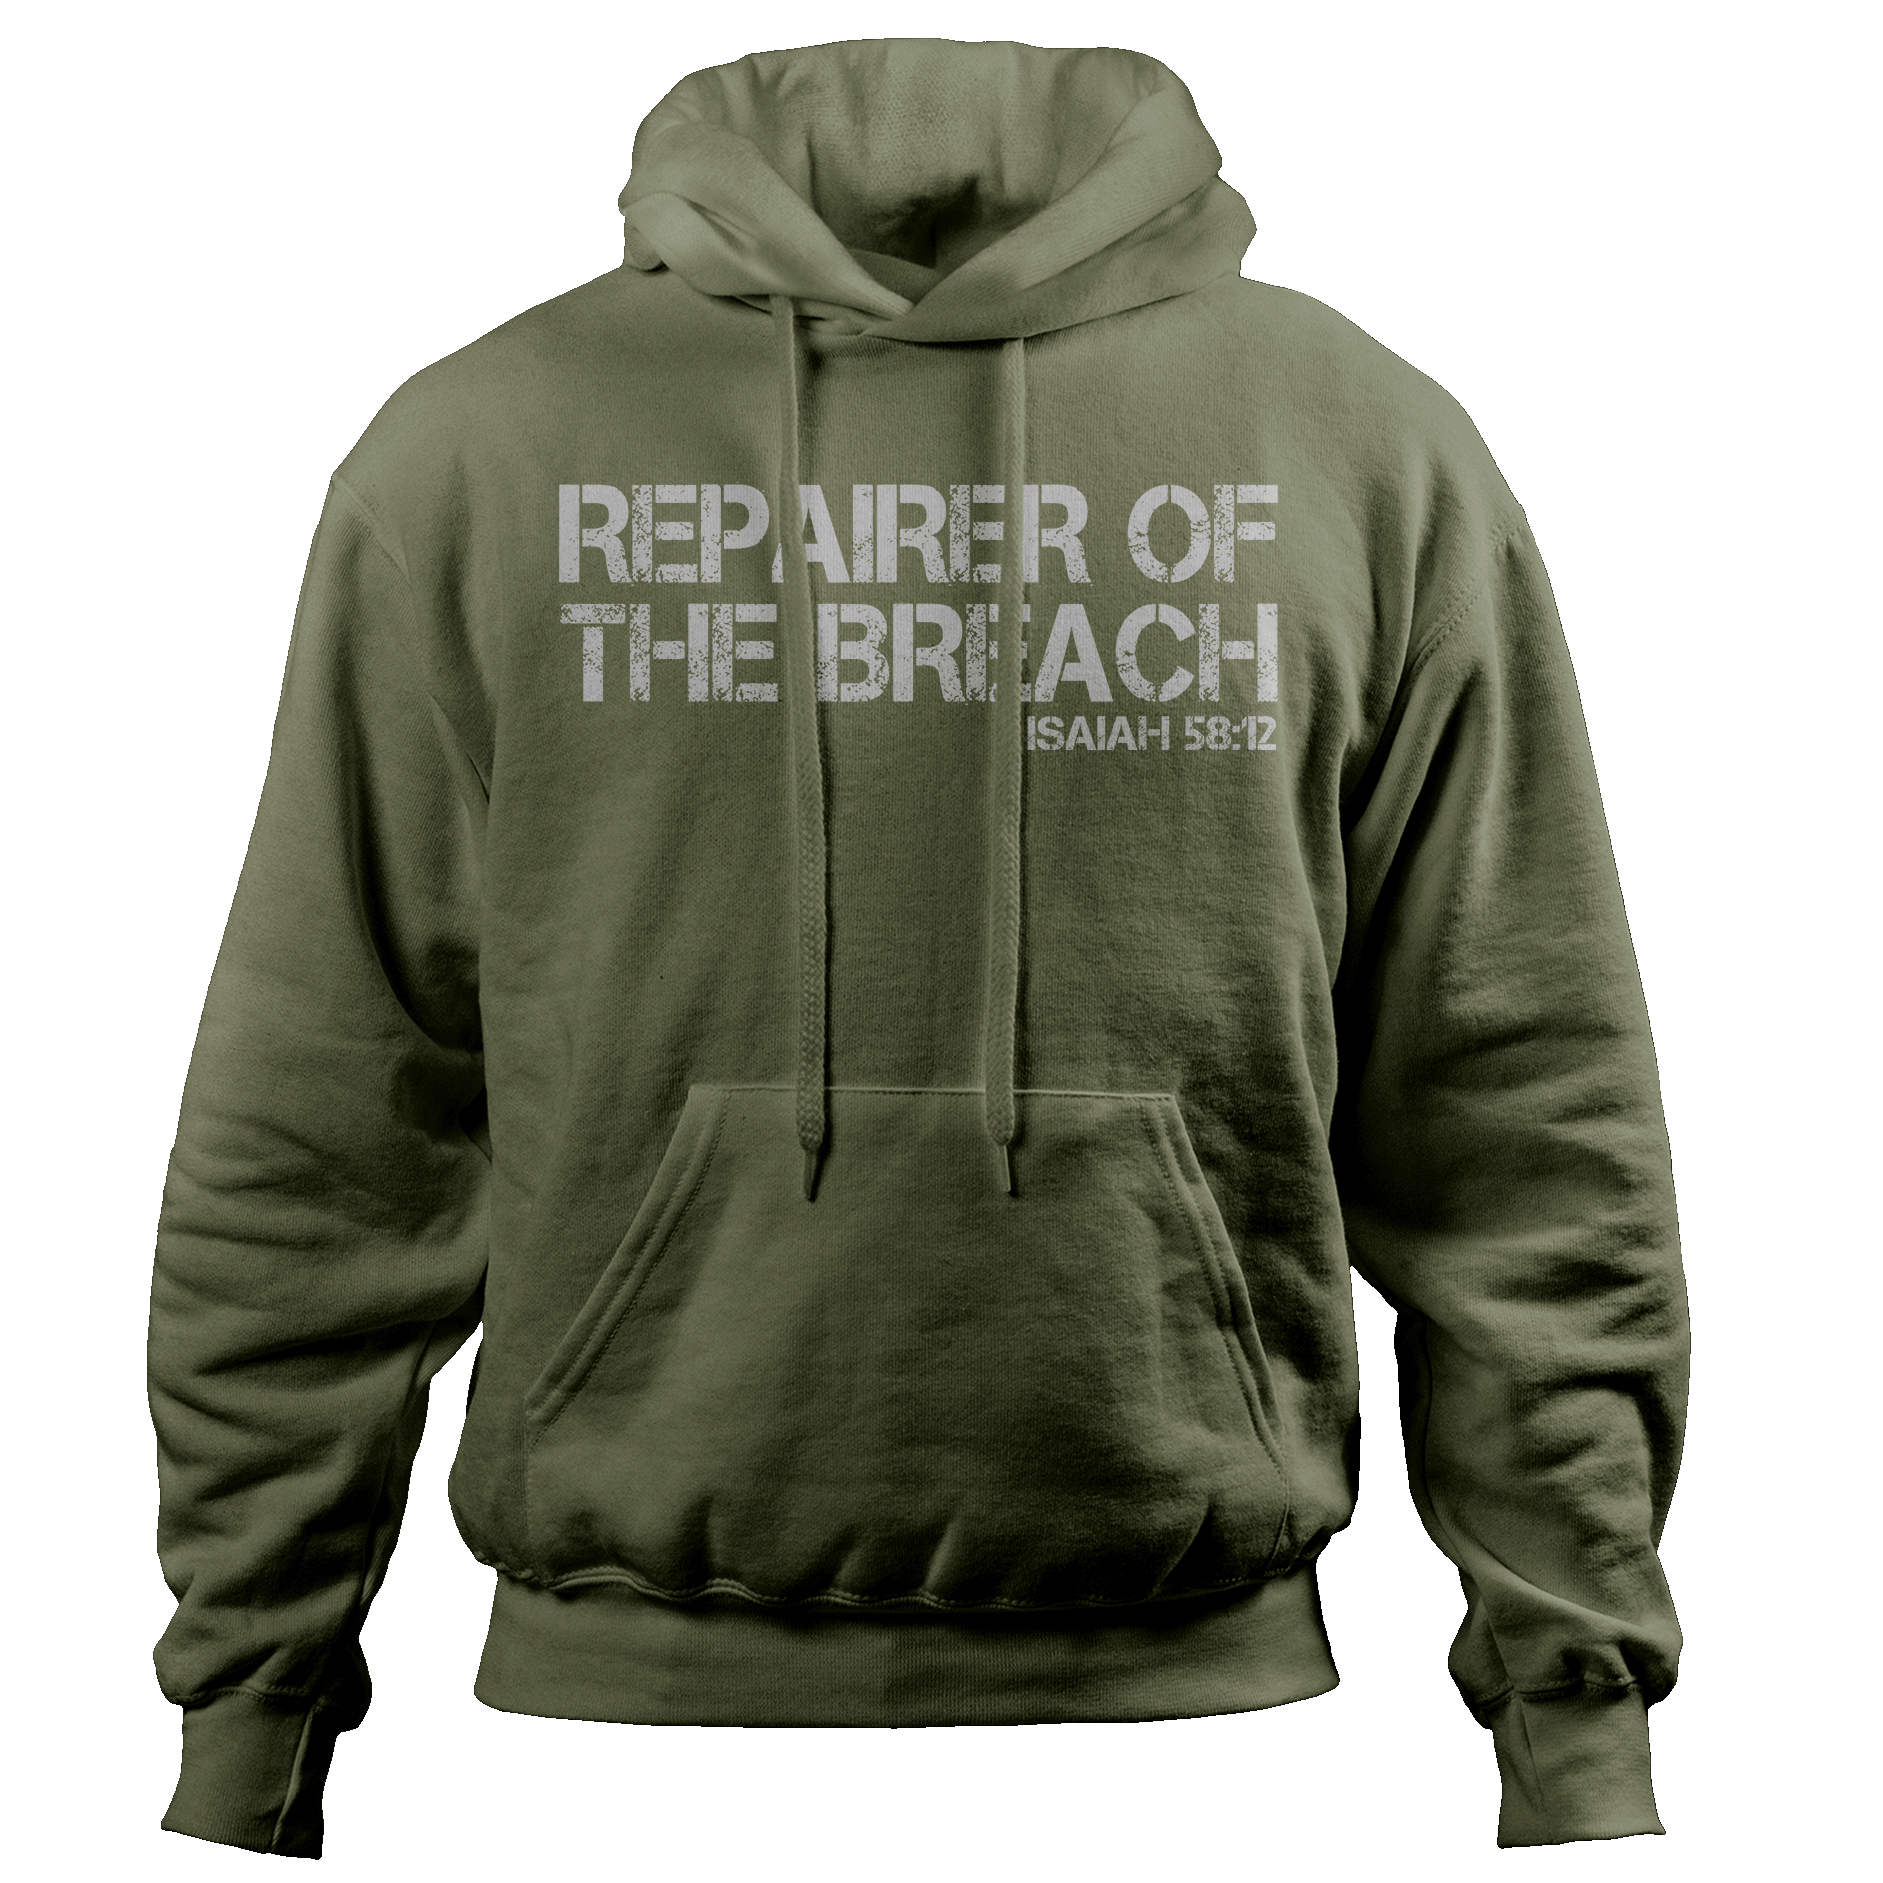 Repairer of the Breach Hoodie